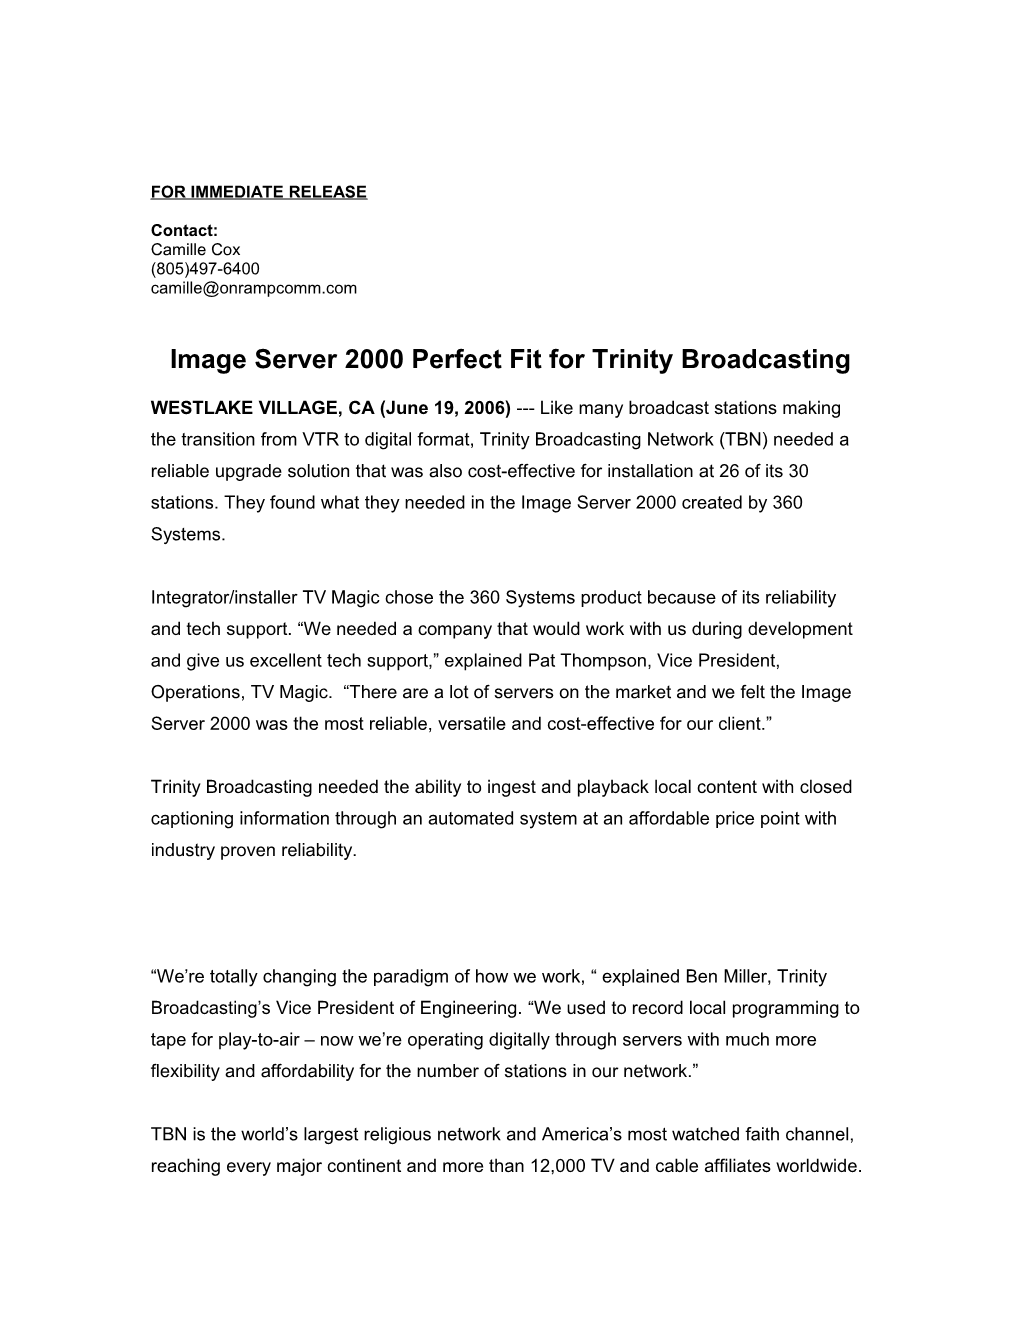 Image Server 2000 Perfect Fit for Trinity Broadcasting